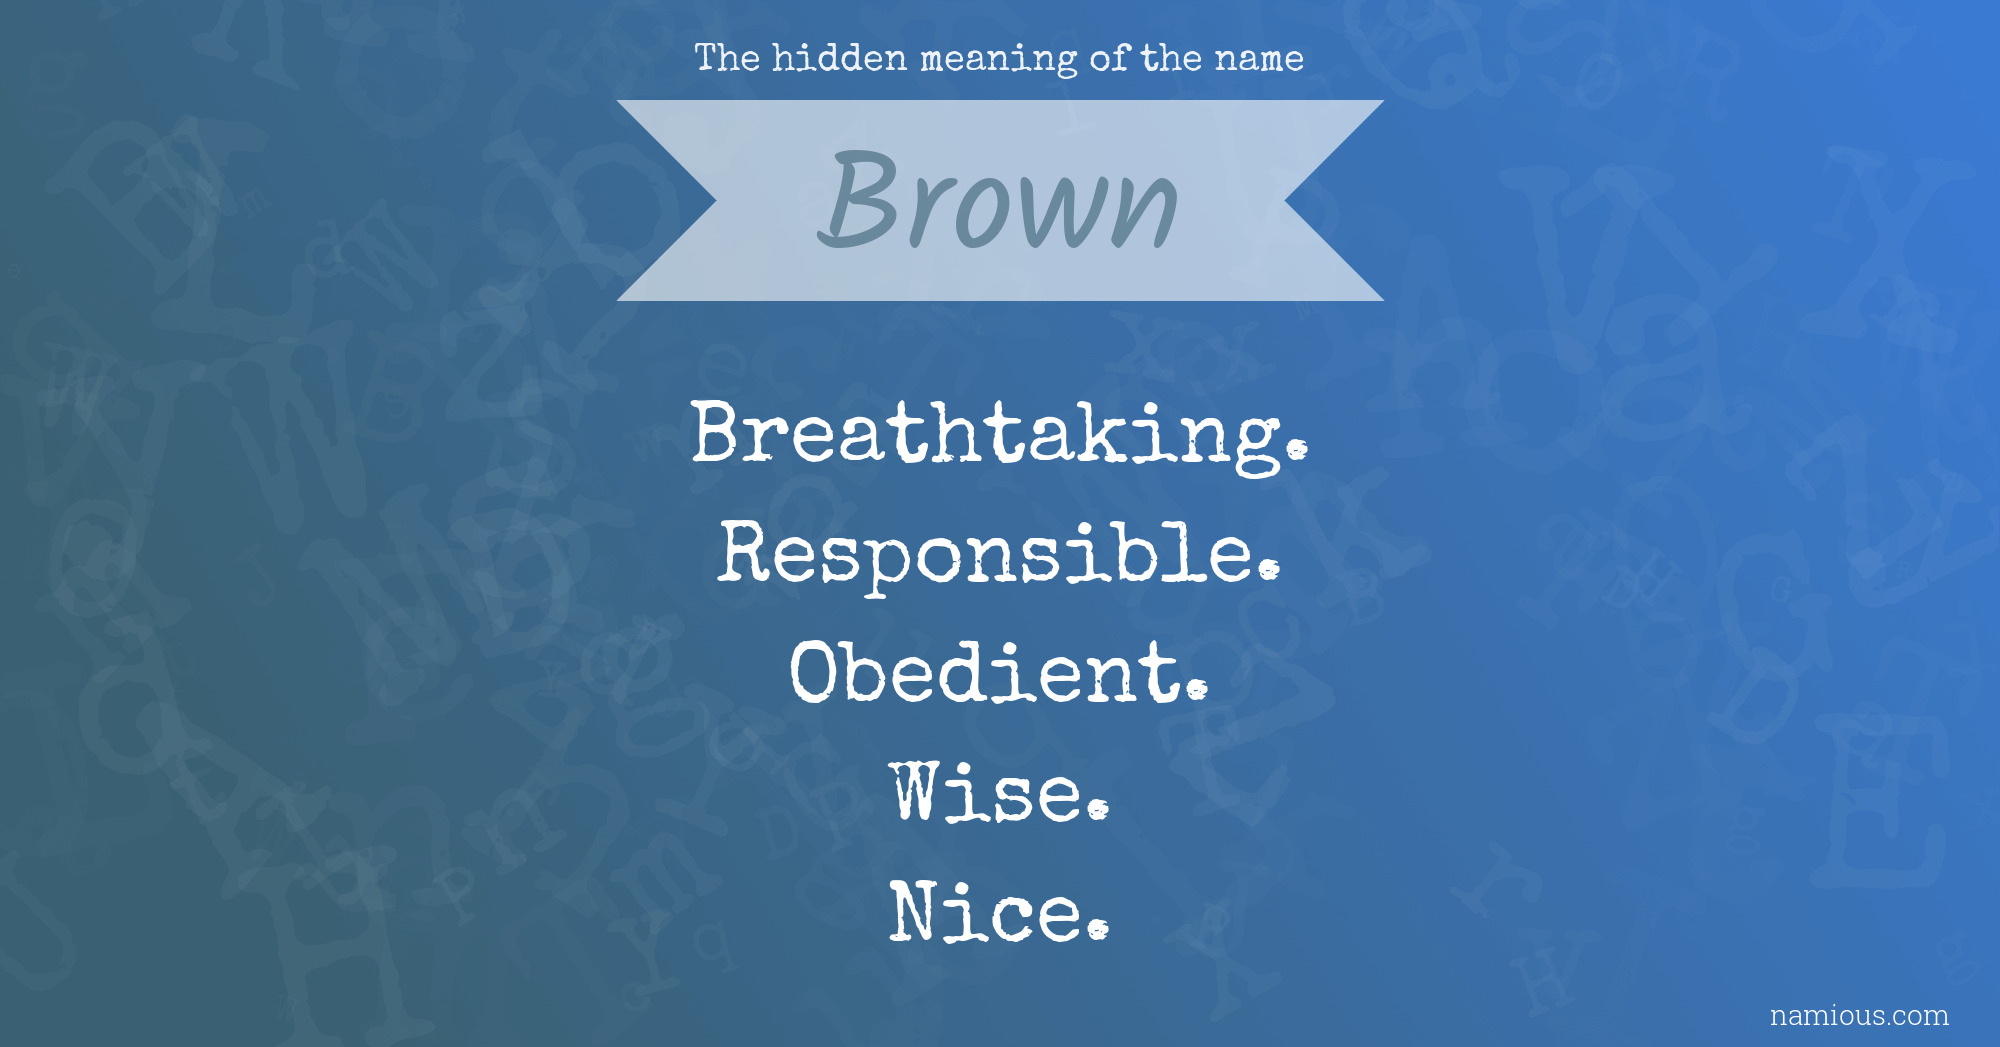 The hidden meaning of the name Brown